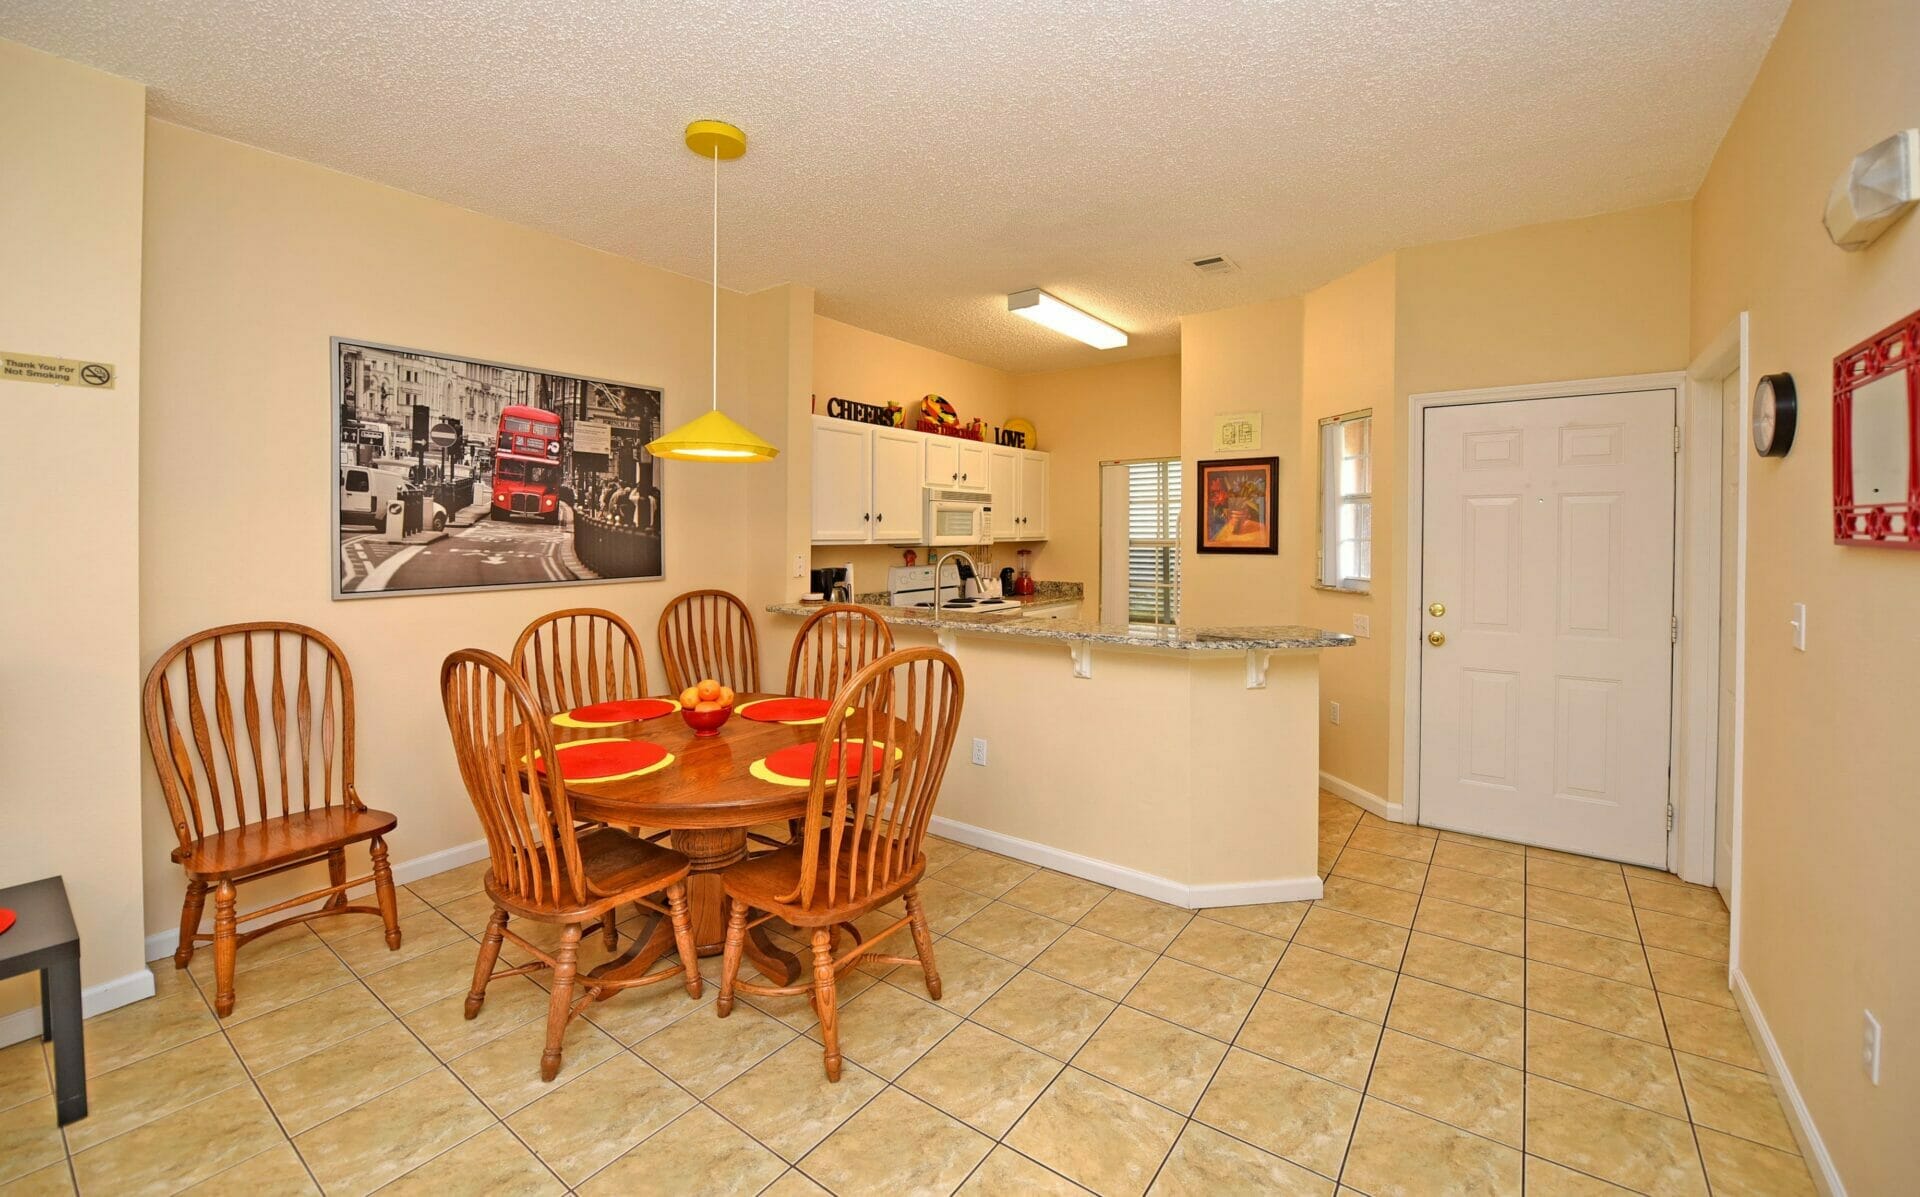 Orlando Rental Home Kitchen and Dining Room OVHome396a